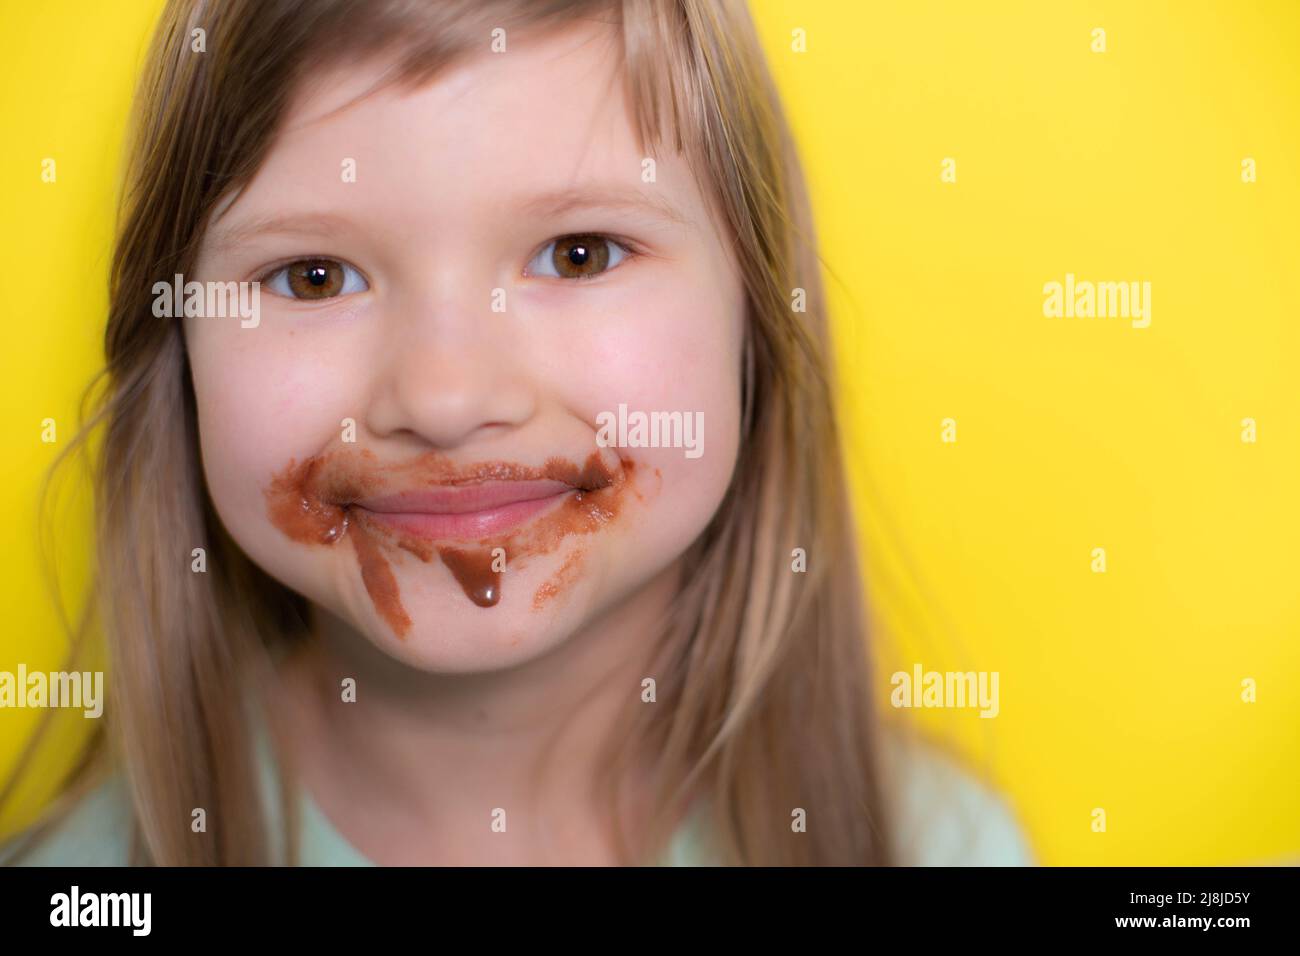 Happy little girl eating chocolate dirty face Stock Photo